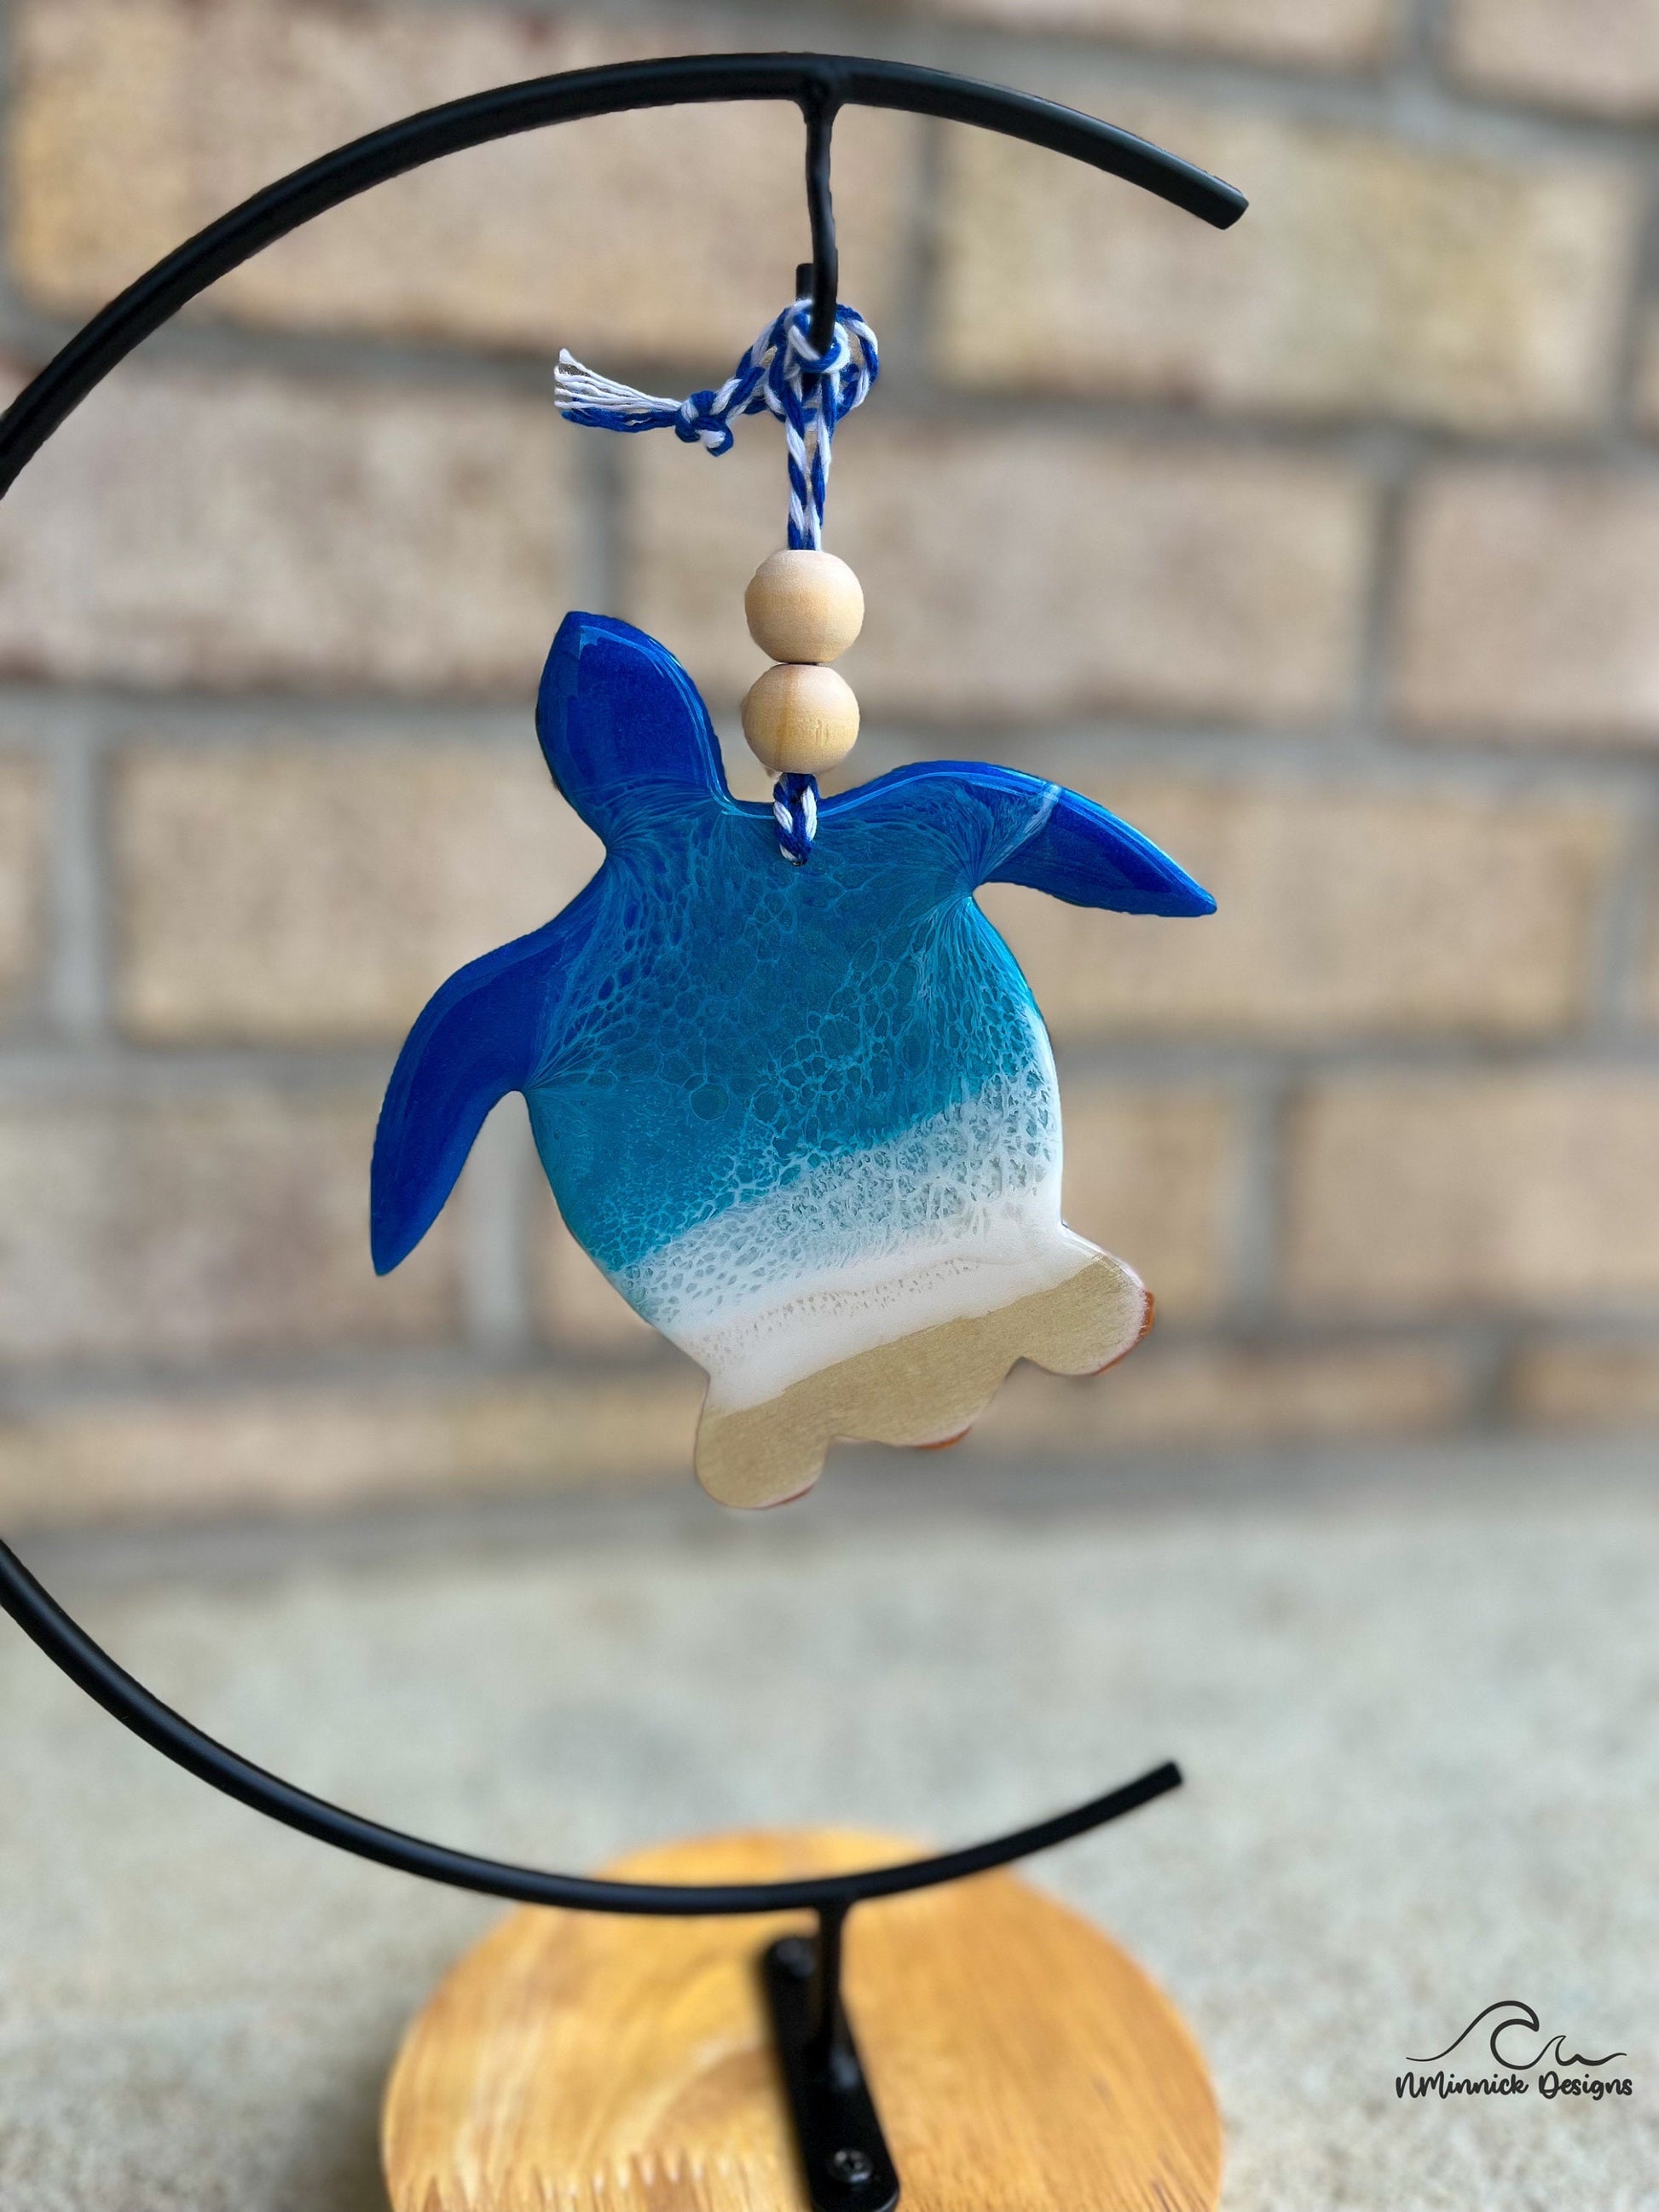 Sea Turtle shaped wood and resin ornament with ocean resin art hanging from an ornament stand.